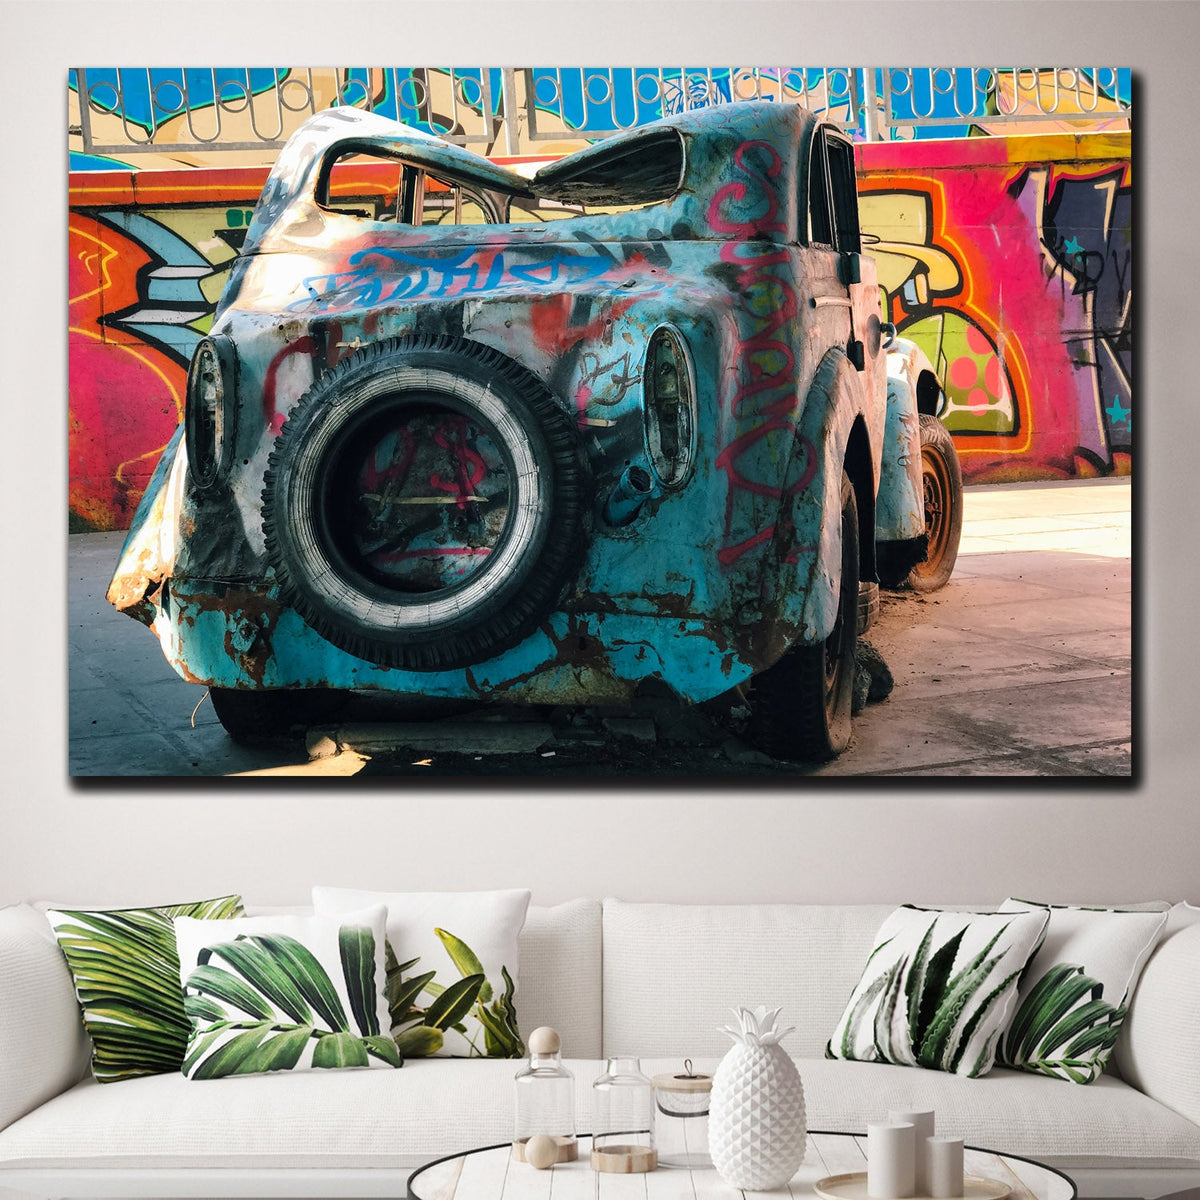 https://cdn.shopify.com/s/files/1/0387/9986/8044/products/OldStreetCarCanvasArtprintStretched-2.jpg